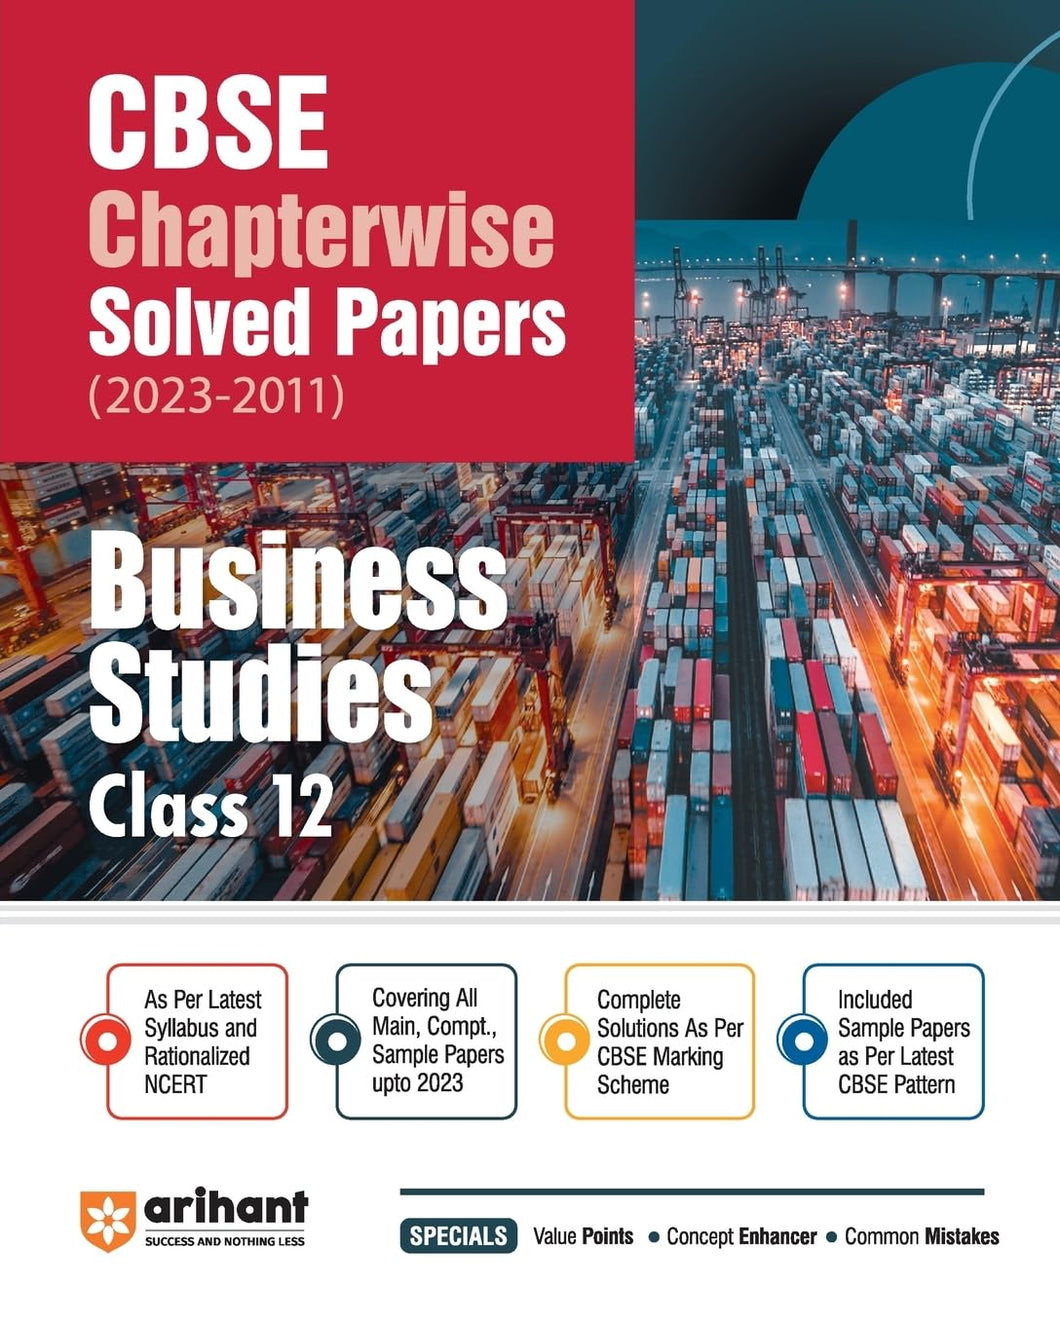 Arihant CBSE Chapterwise Solved Papers 2023-2011 Business Studies Class 12th